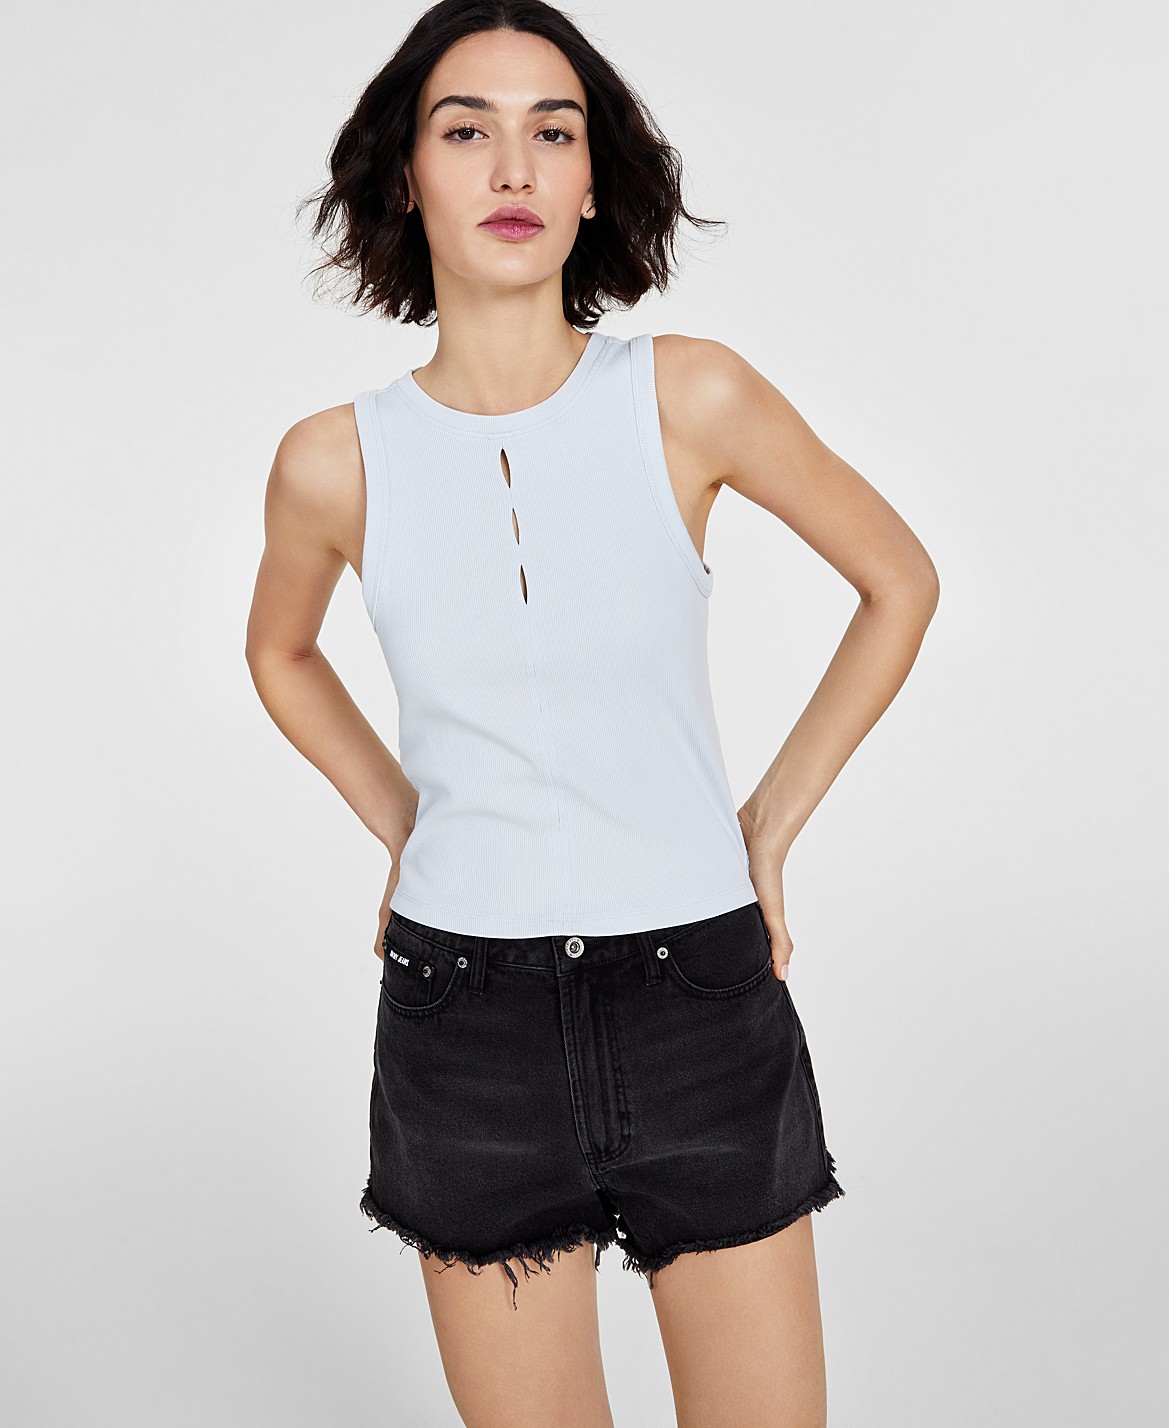 dkny jeans tops for women